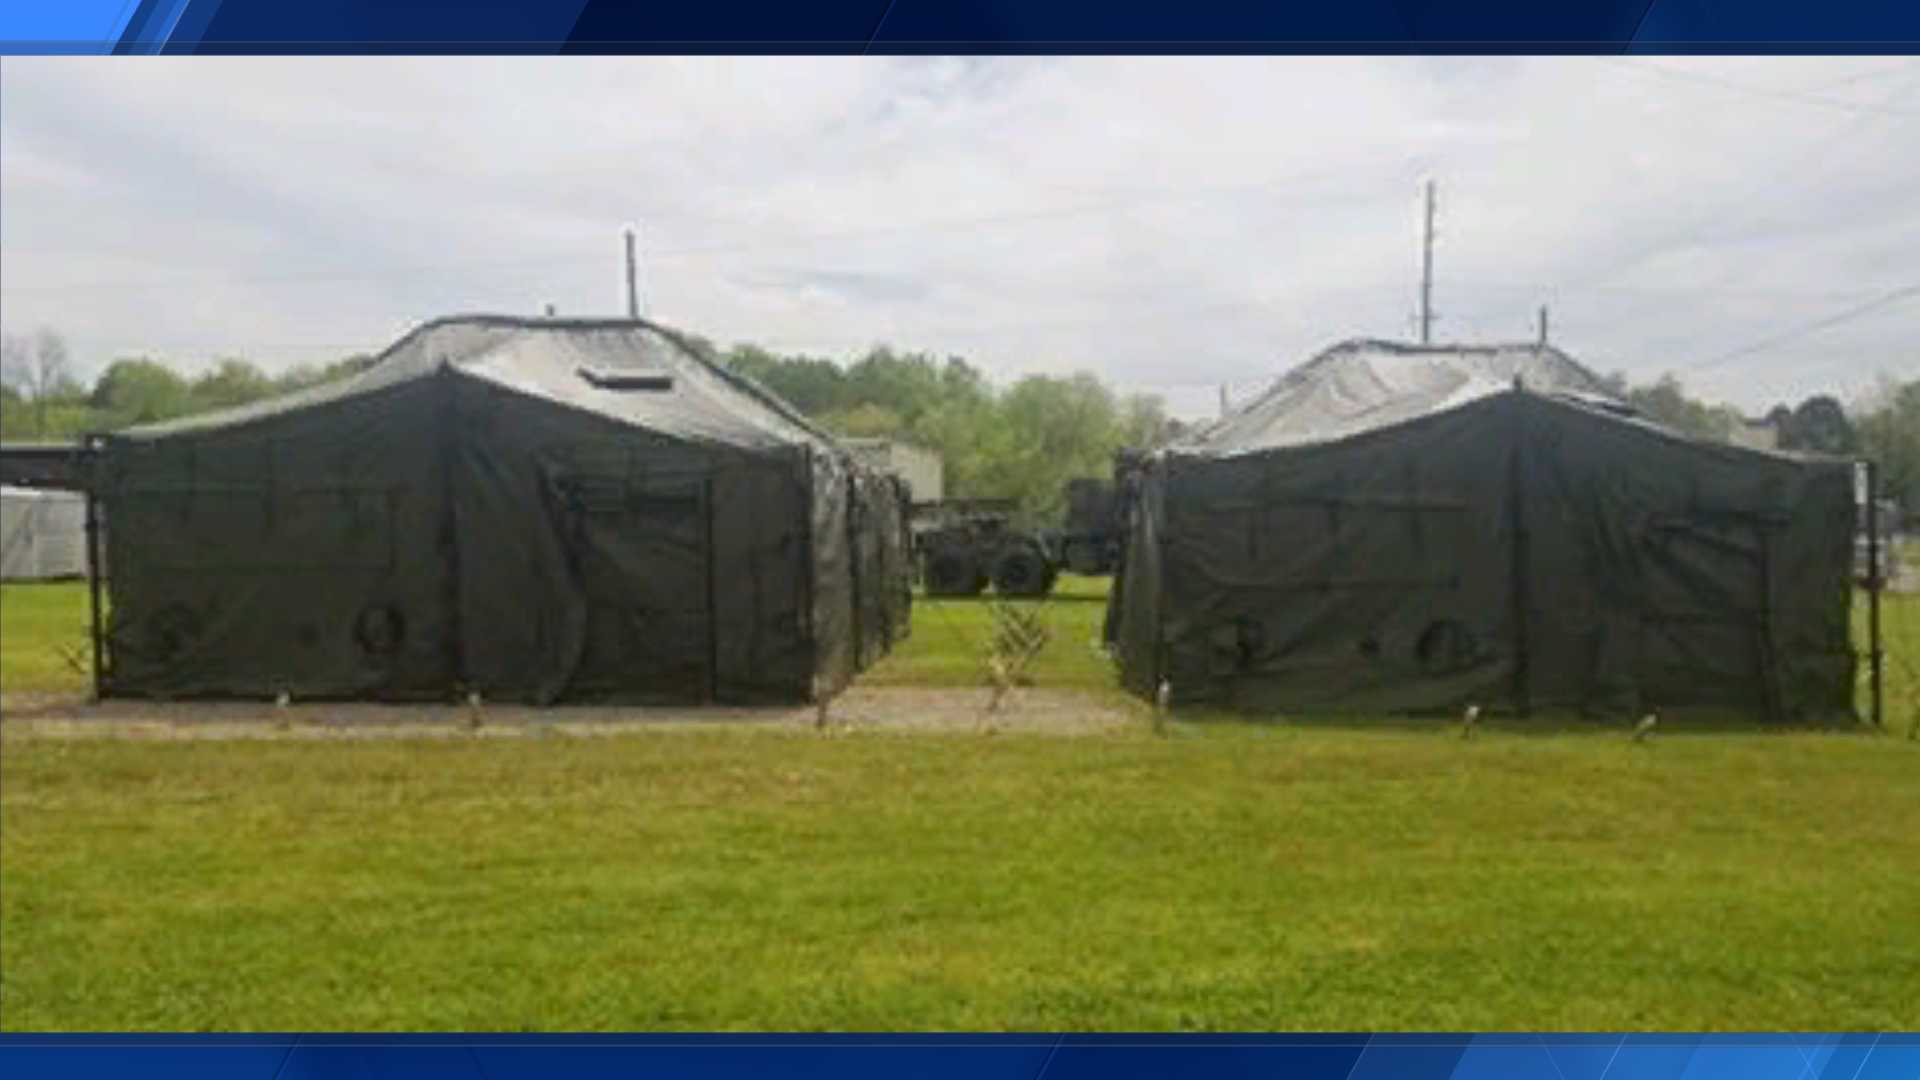 Walker county sets up MASH style tents for potential housing of